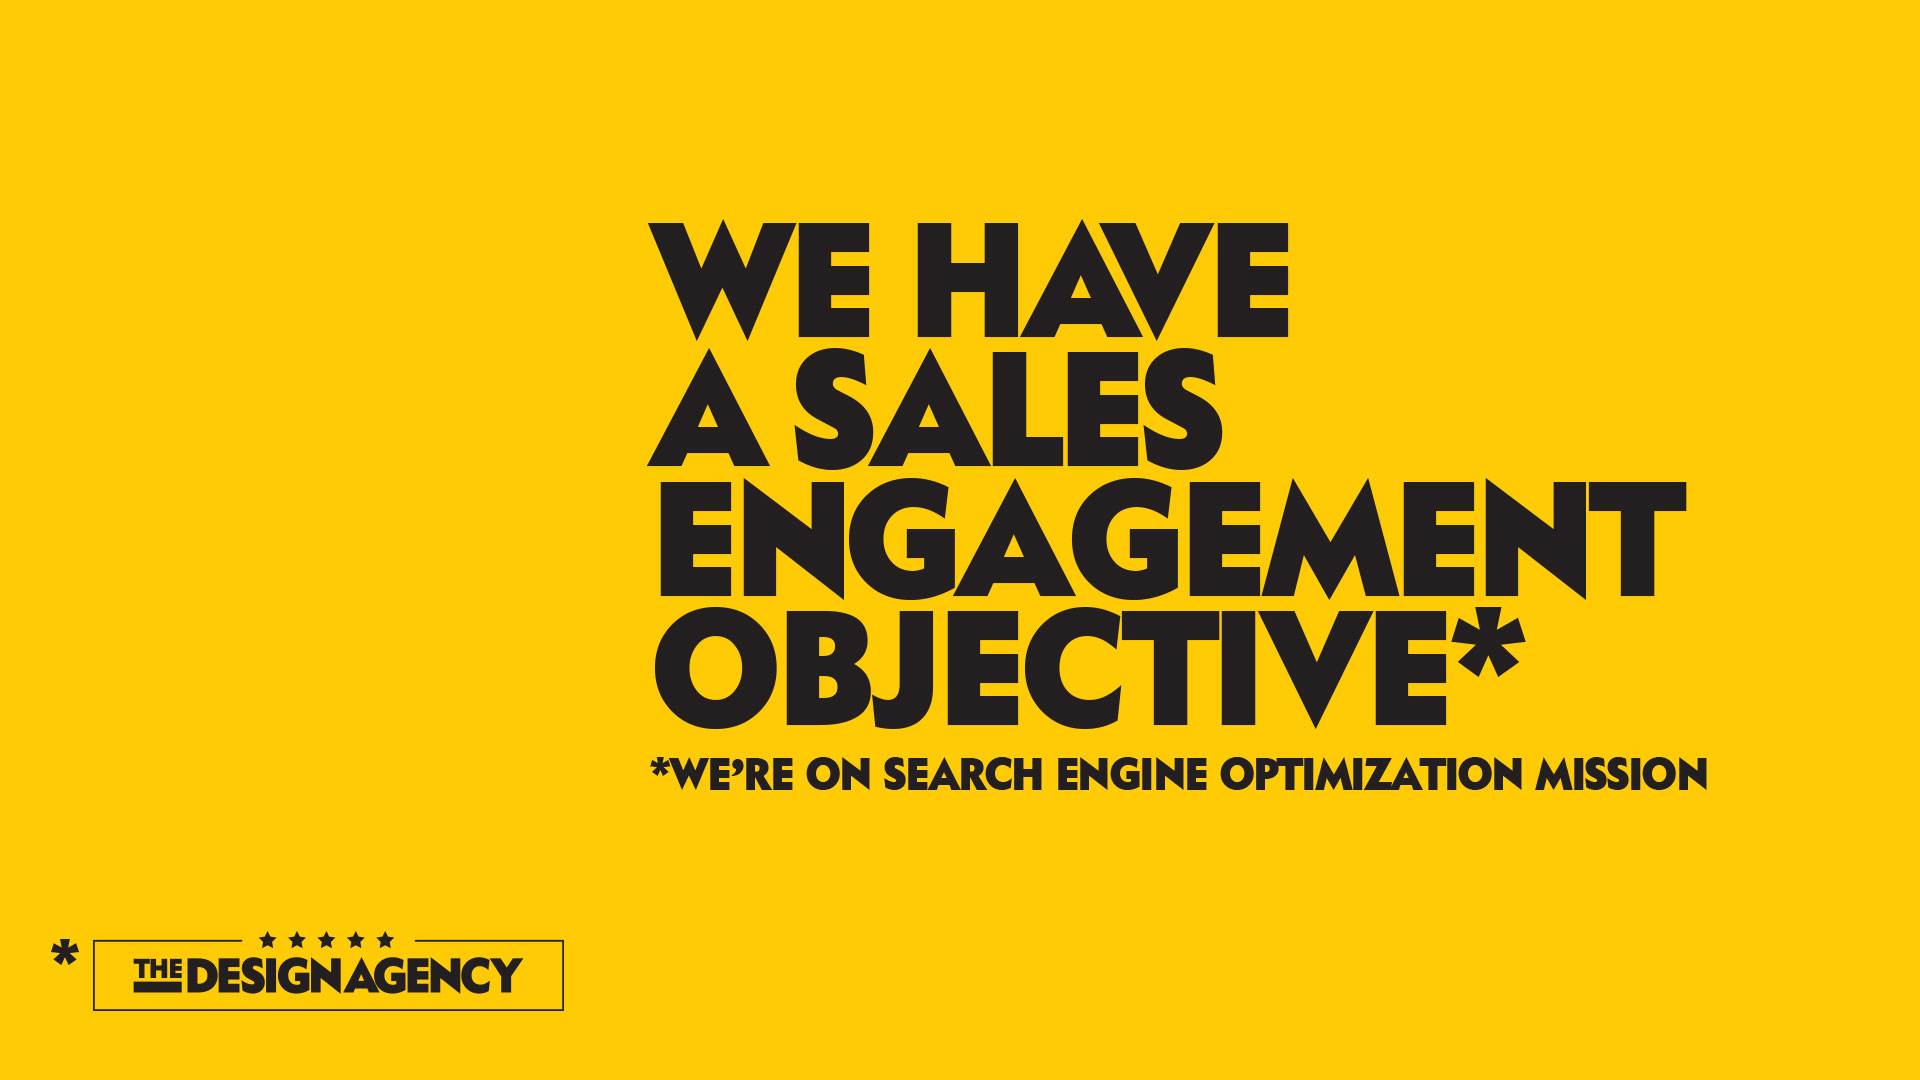 SEO - We a have a sales engagement objective